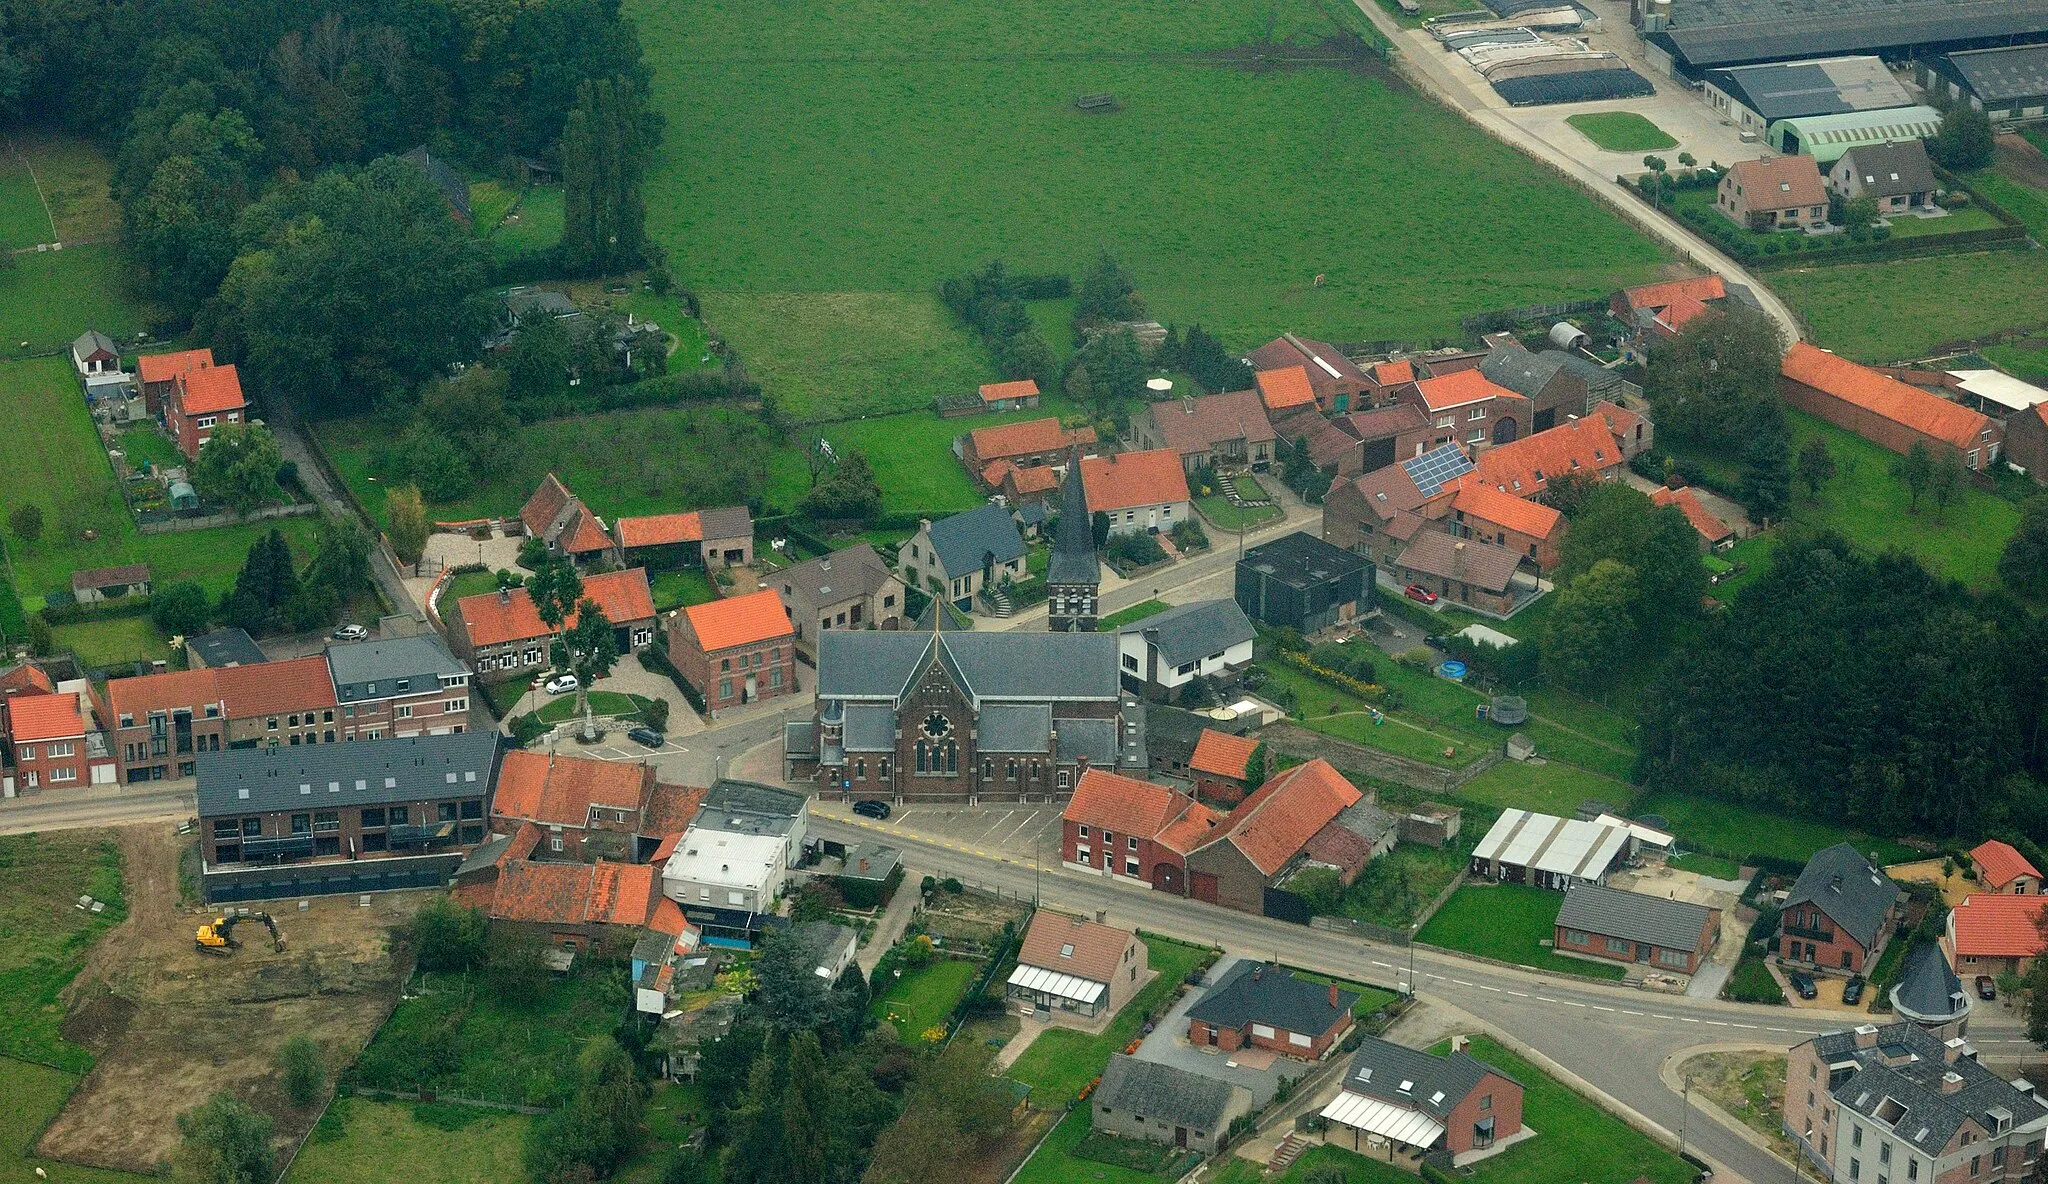 Photo showing: Aerial view from the South towards the old centre of Glabbeek, Belgium. Nikon D60 f=55mm f/9 at 1/320s ISO 800. Processed using Nikon ViewNX 1.5.2 and GIMP 2.6.6.